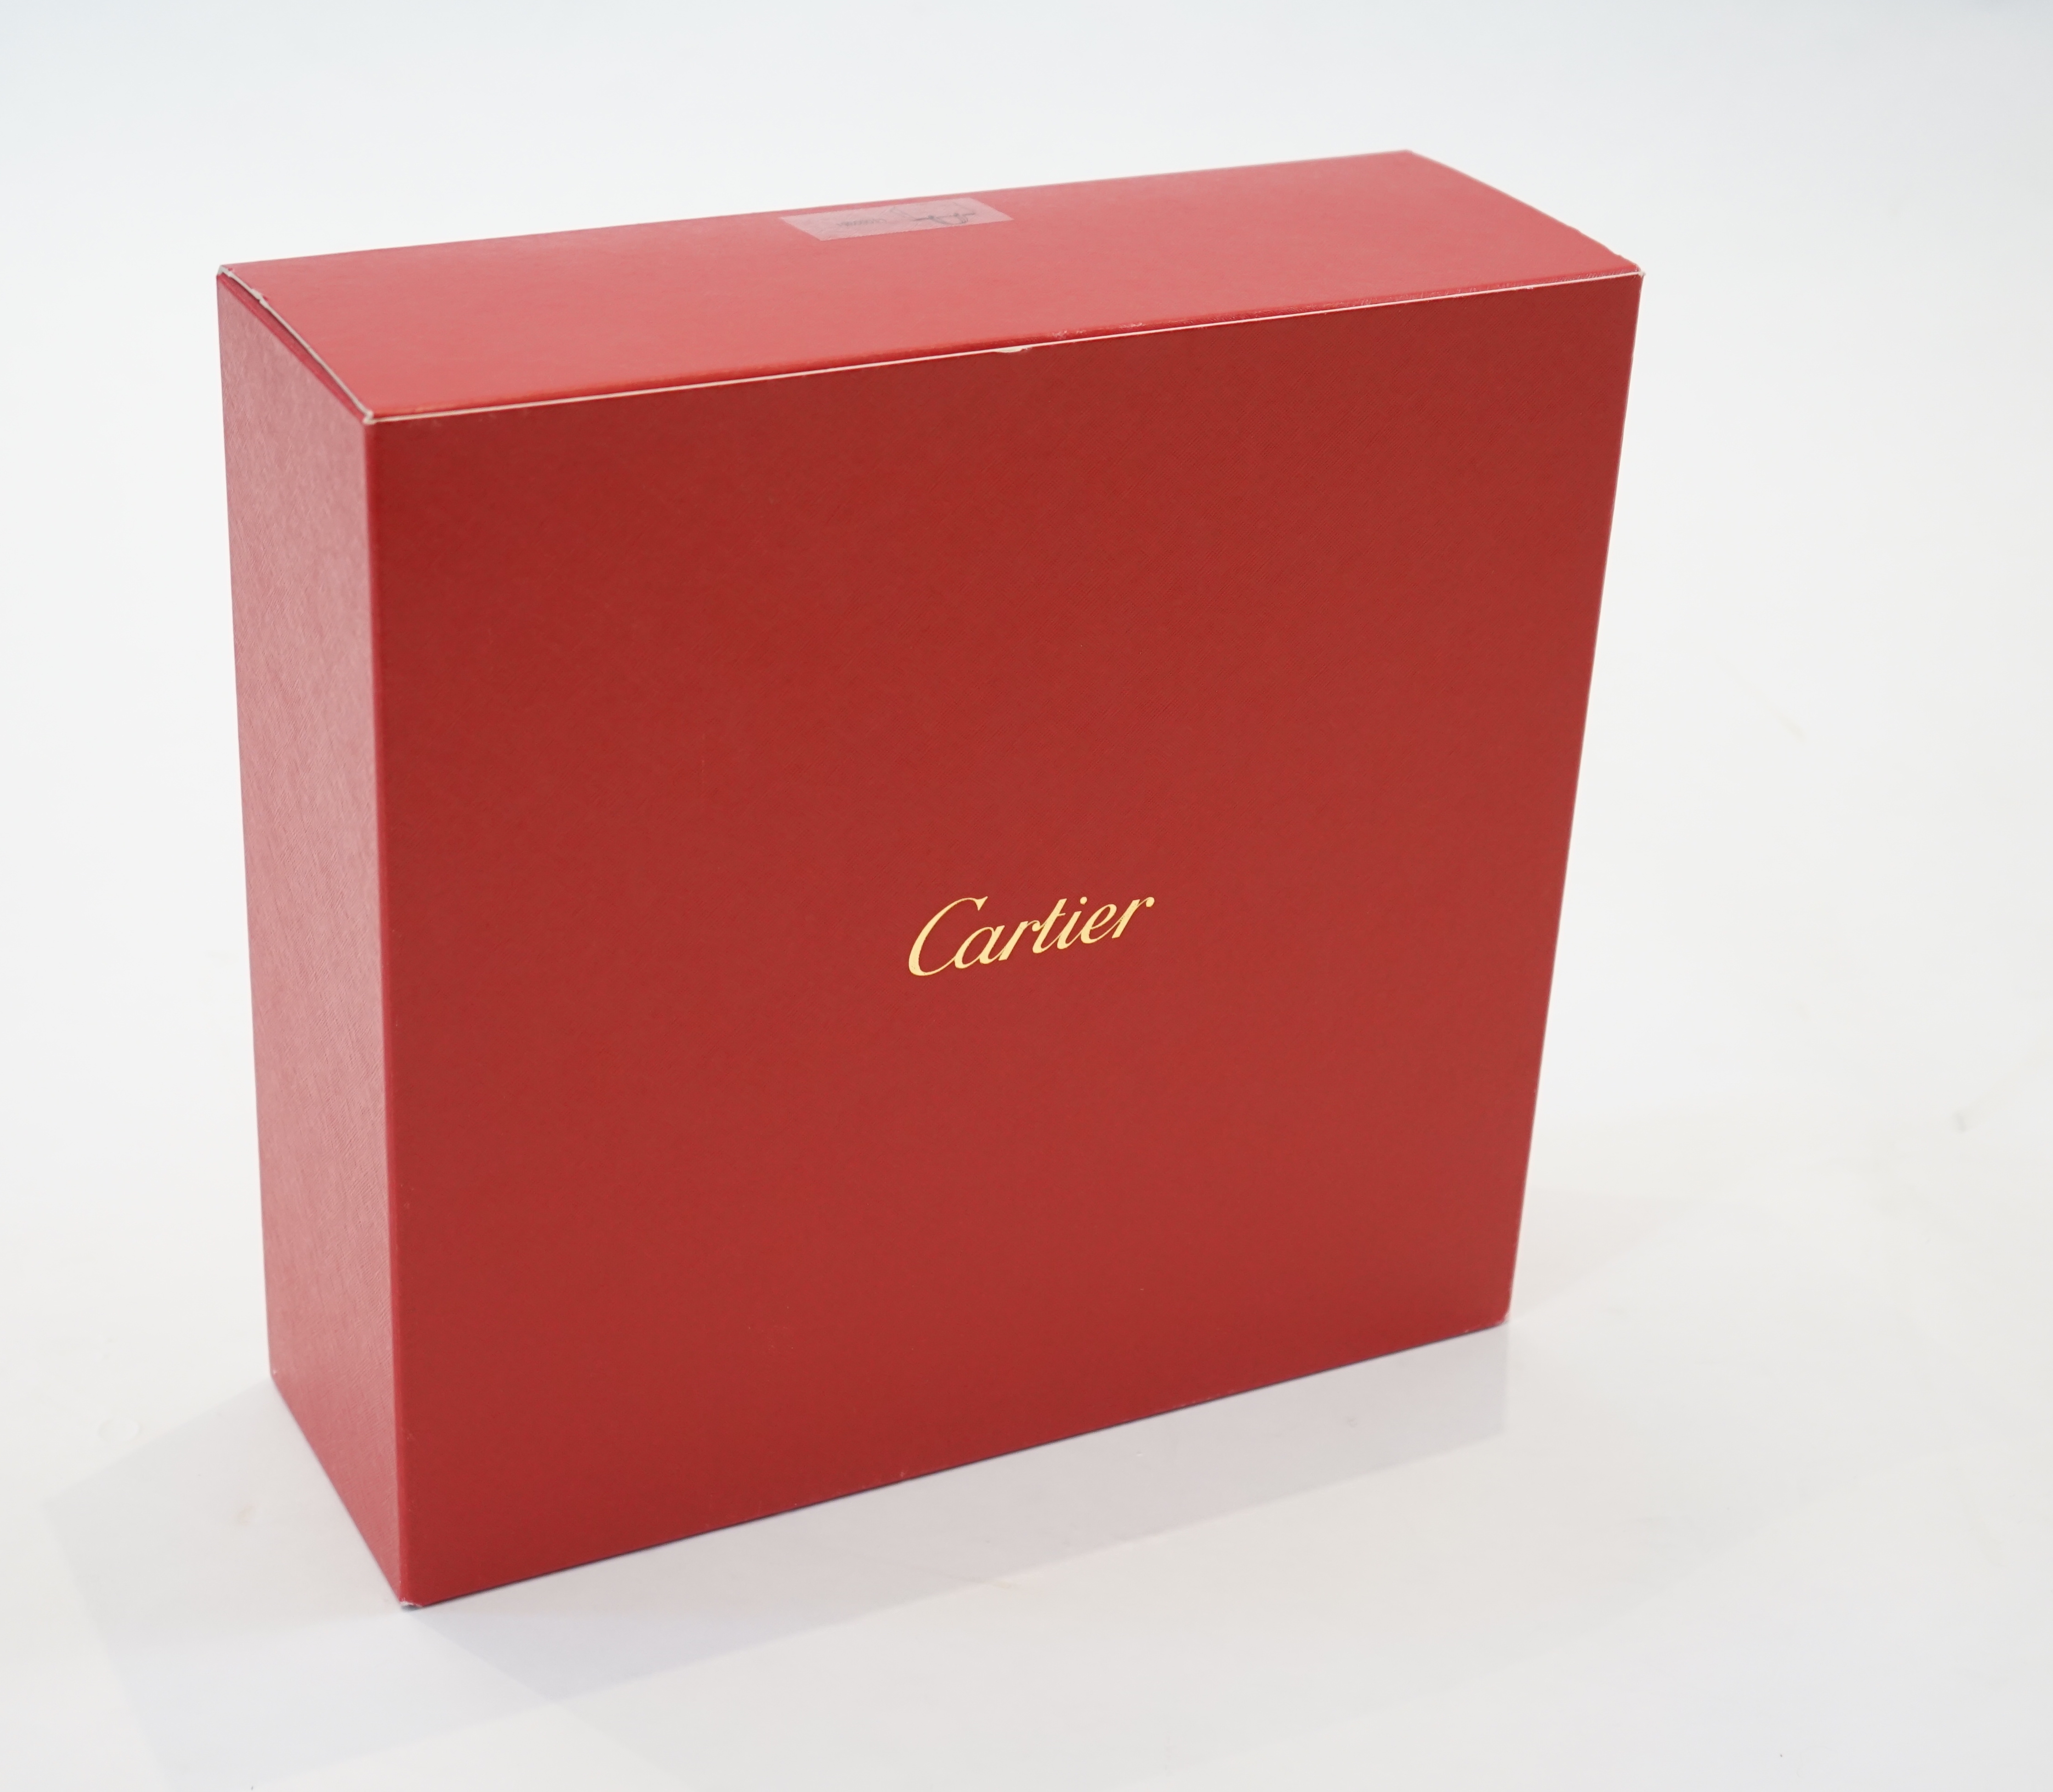 A Cartier Panthère shopping bag in black leather, width 37cm, depth 13cm, height 28cm